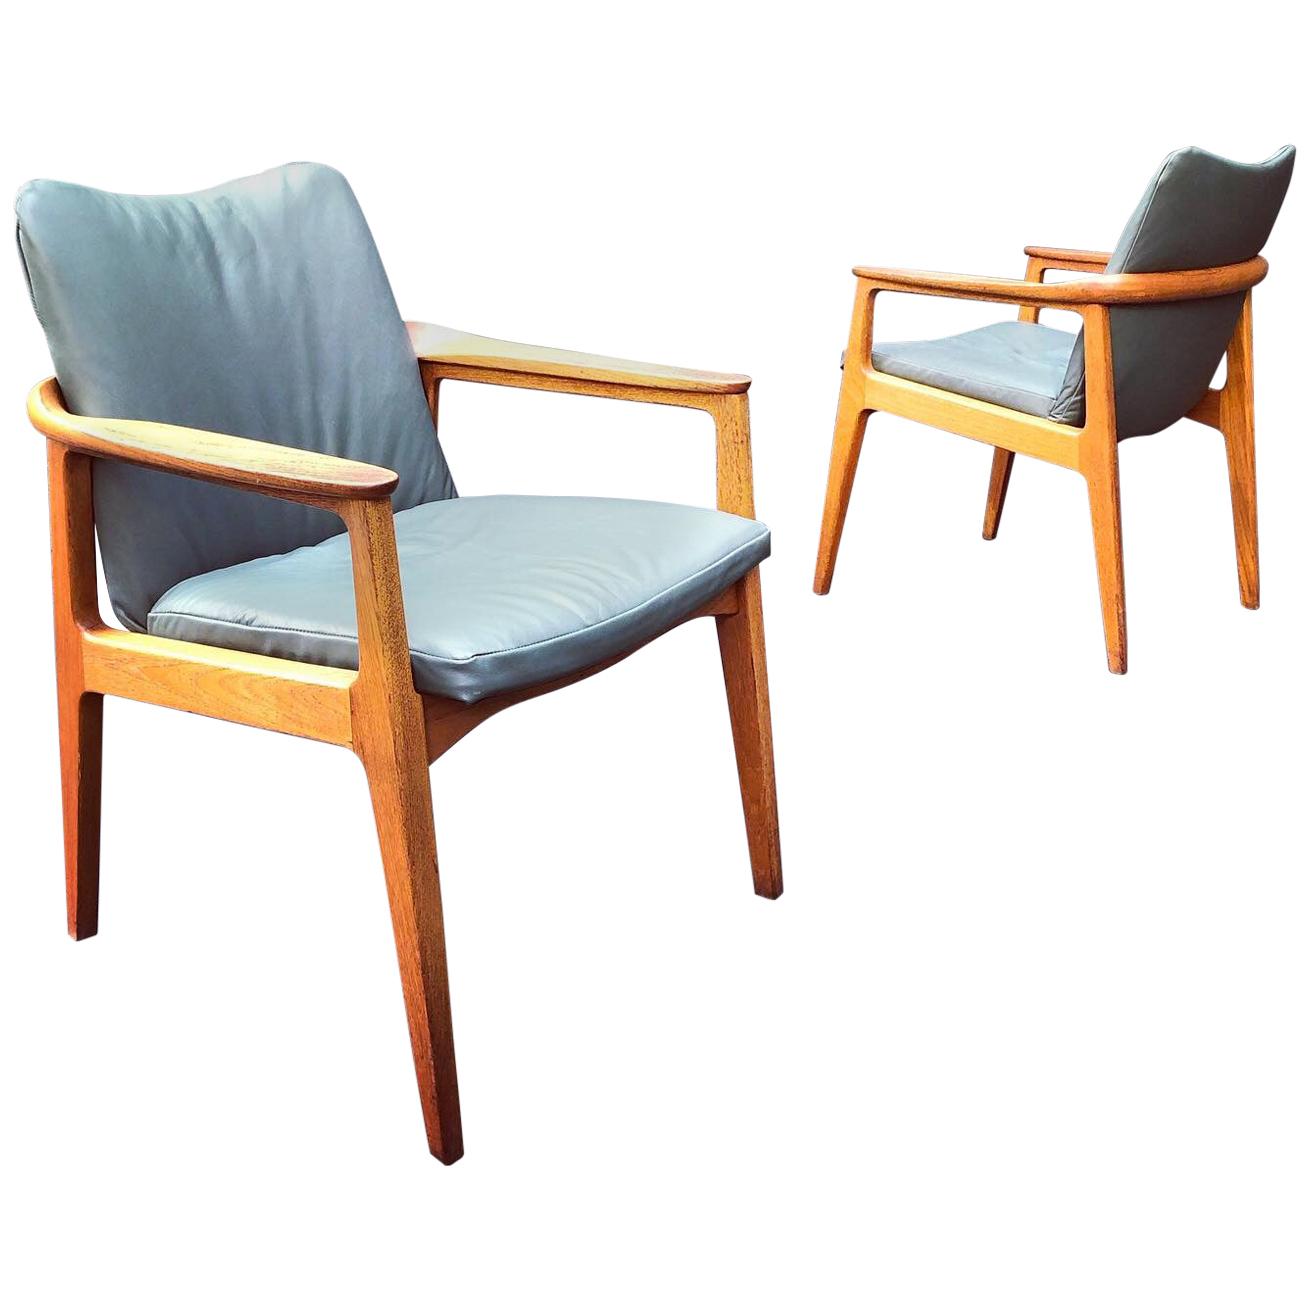 Pair of Midcentury Danish Modern Teak and Leather Chairs by Sigvard Bernadotte